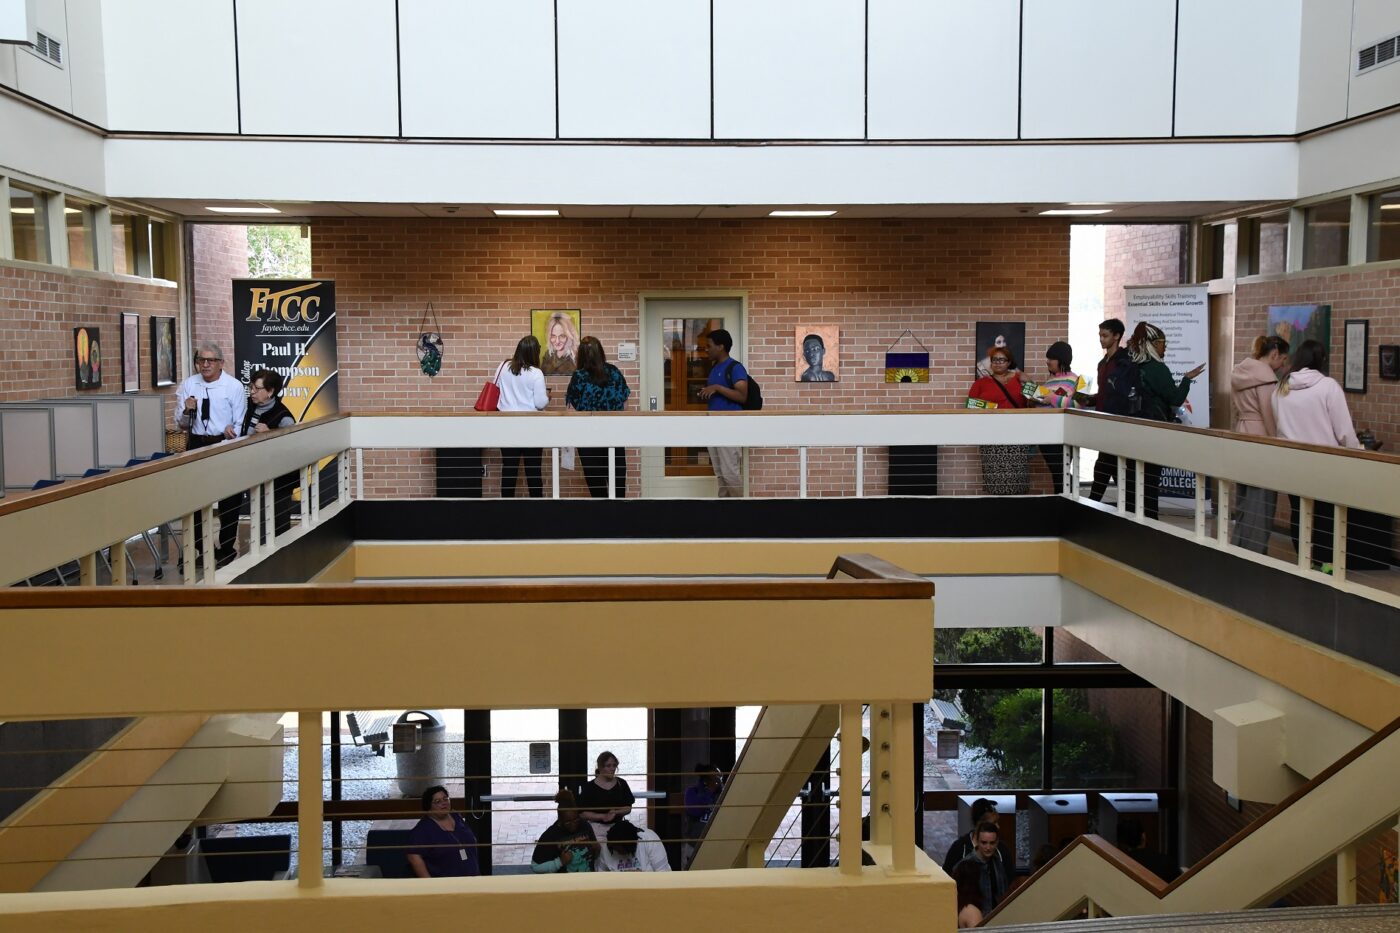 A wide photo showing people walking around the top floor of the library looking at artwork on the walls.